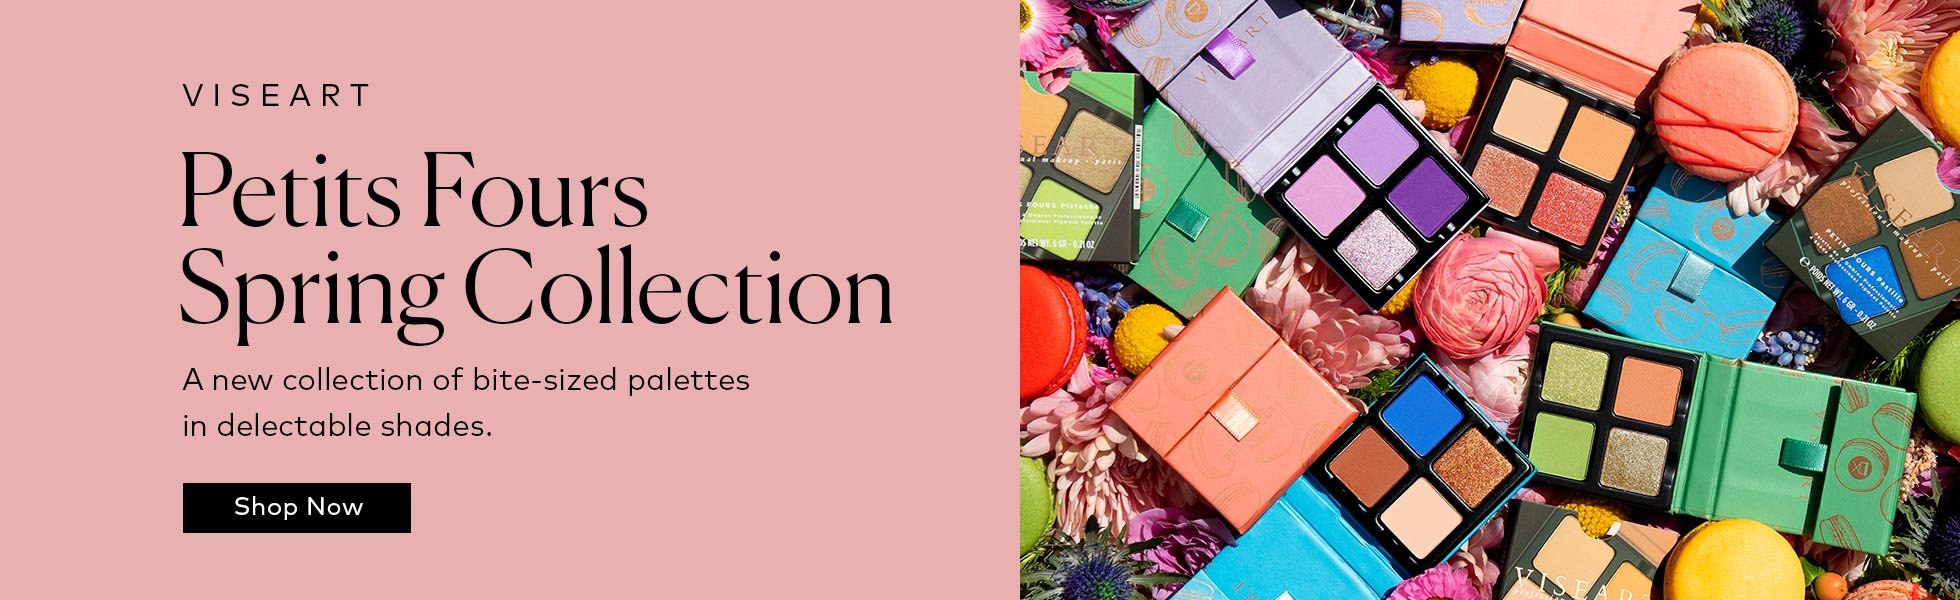 Shop the Viseart Petits Fours Spring Collection on Beautylish.com